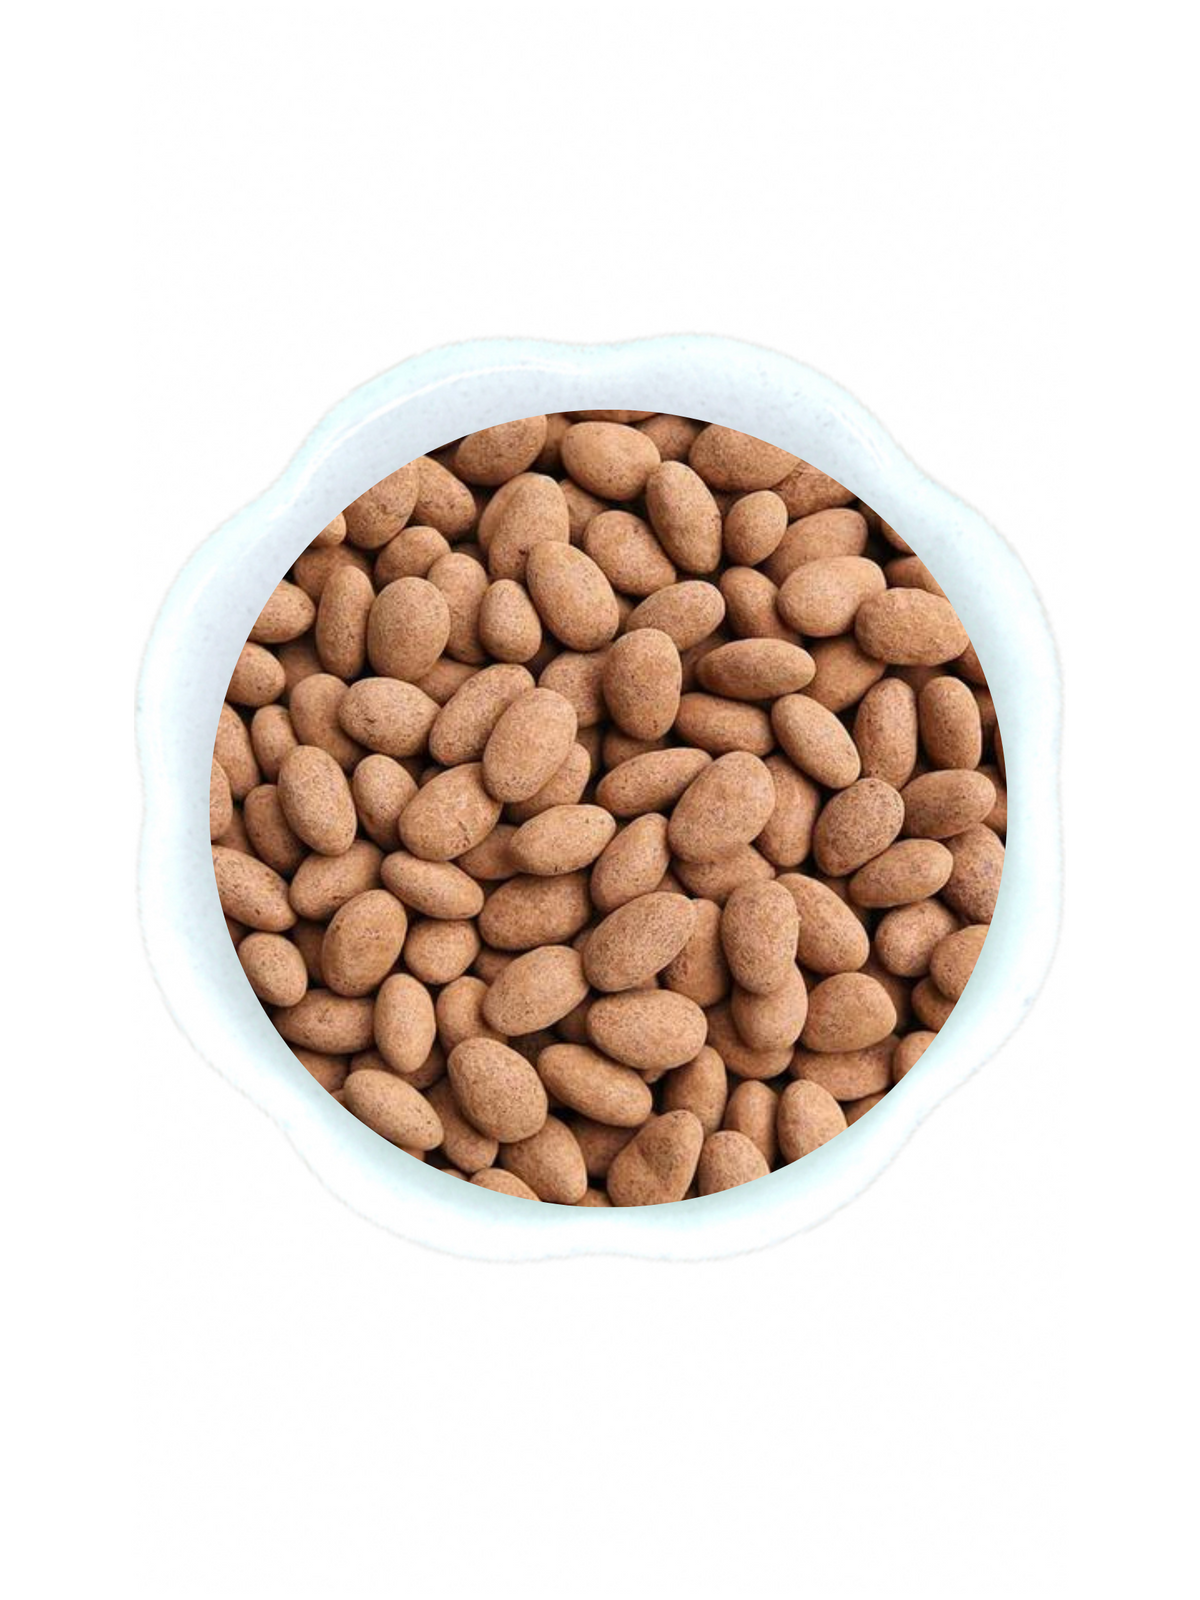 Dark Chocolate Covered Almonds - Calgary Pick Up only due to hot weather